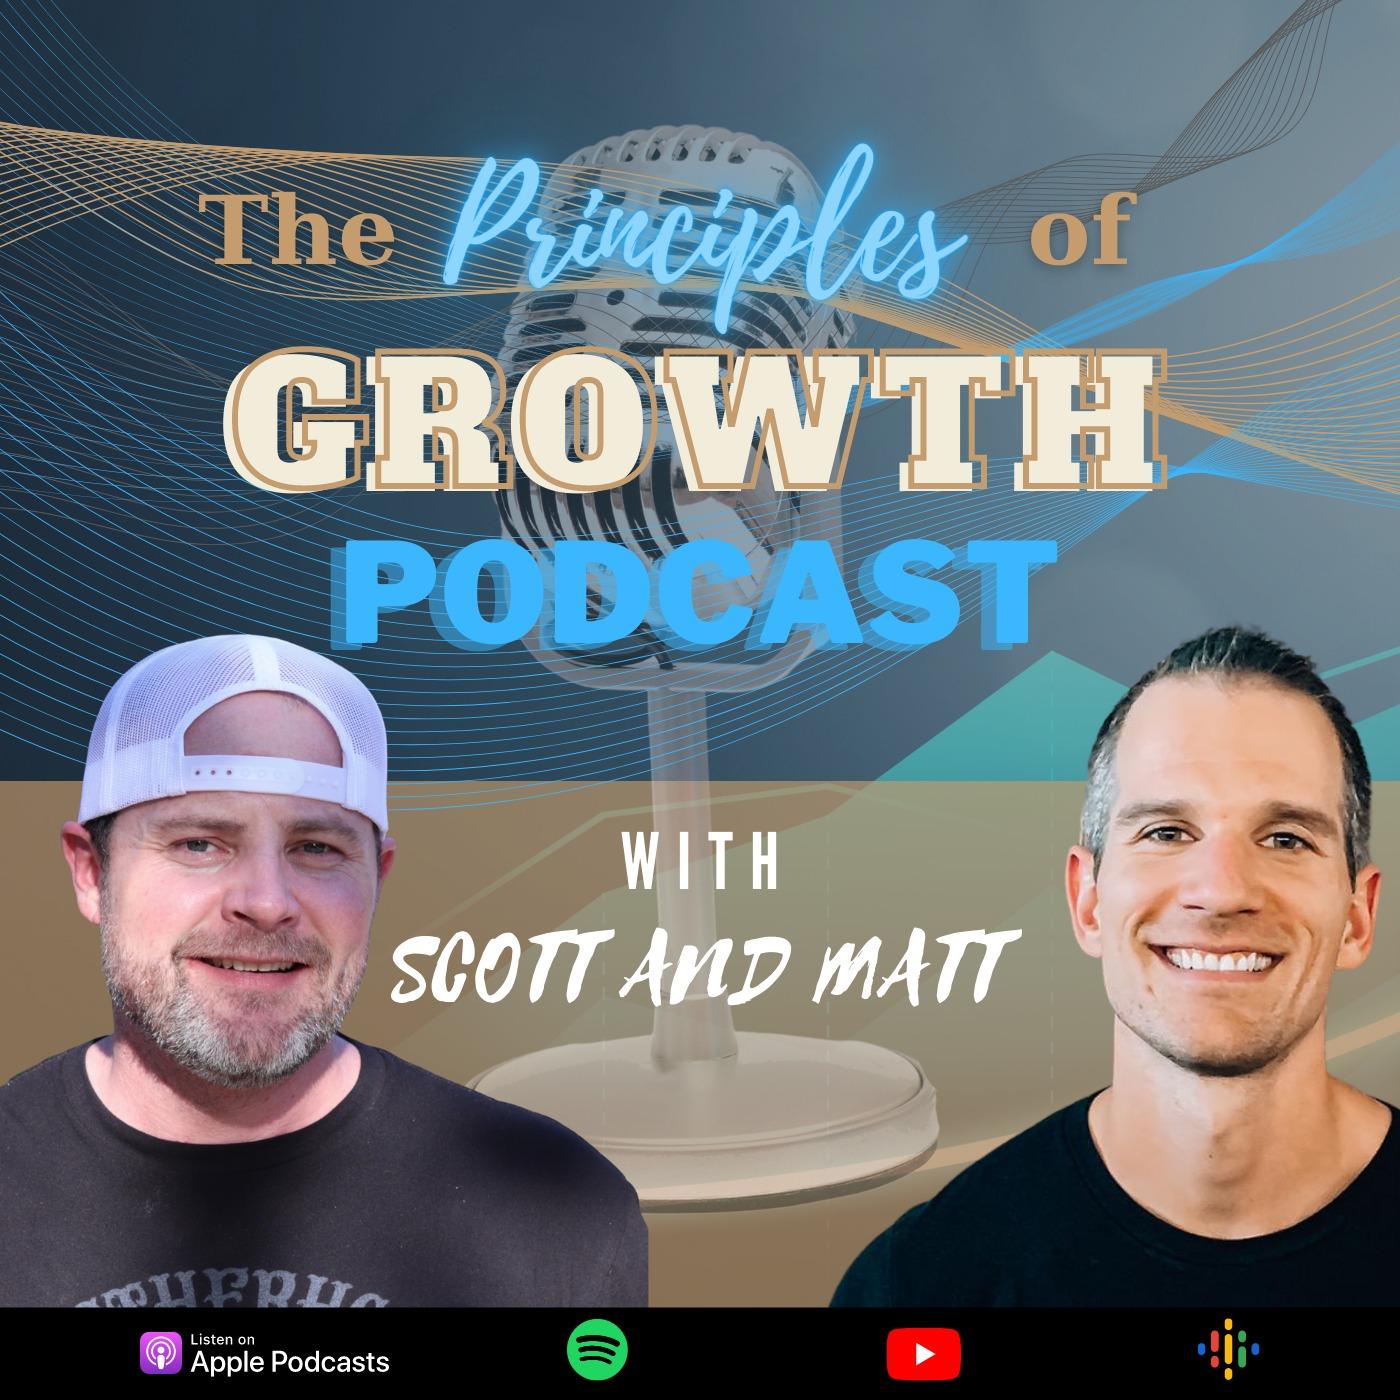 The Principles of Growth